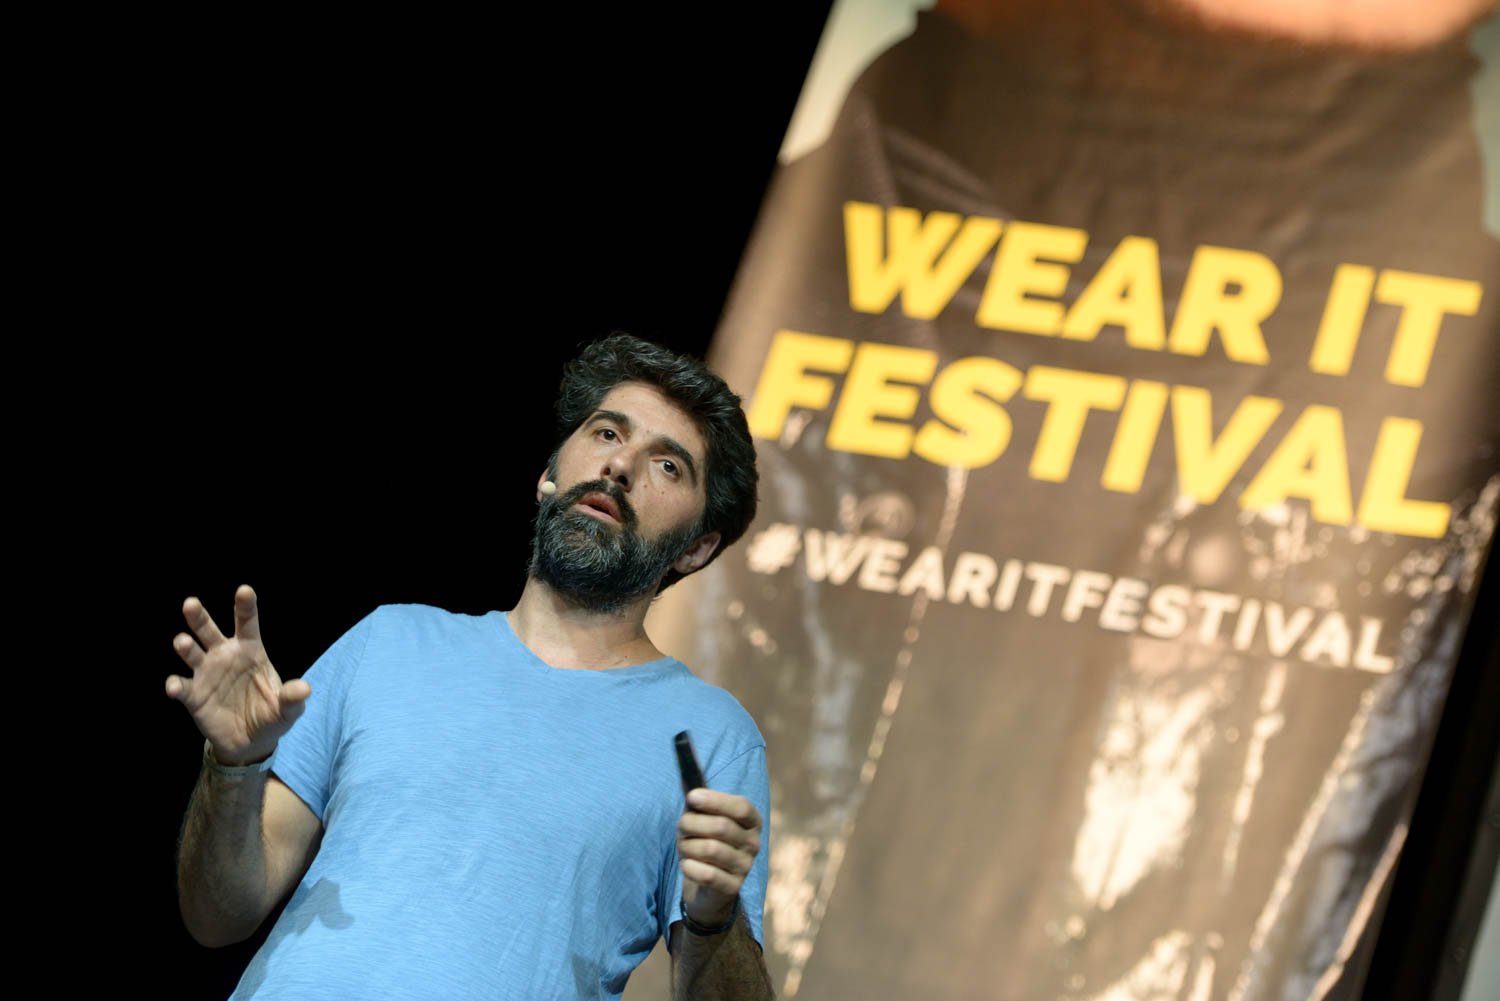 Expanding Our Cognitive Behaviour through Anomaly Detection Algorithms by Avi Elran (CODEPAN) at the Wear It Festival - The Conference on Wearables, fashion tech, smart clothing and consumer innovation on 19-20 June 2018 at the Kulturbrauerei Berlin - (c) Wear It Berlin / Michael Wittig, Berlin